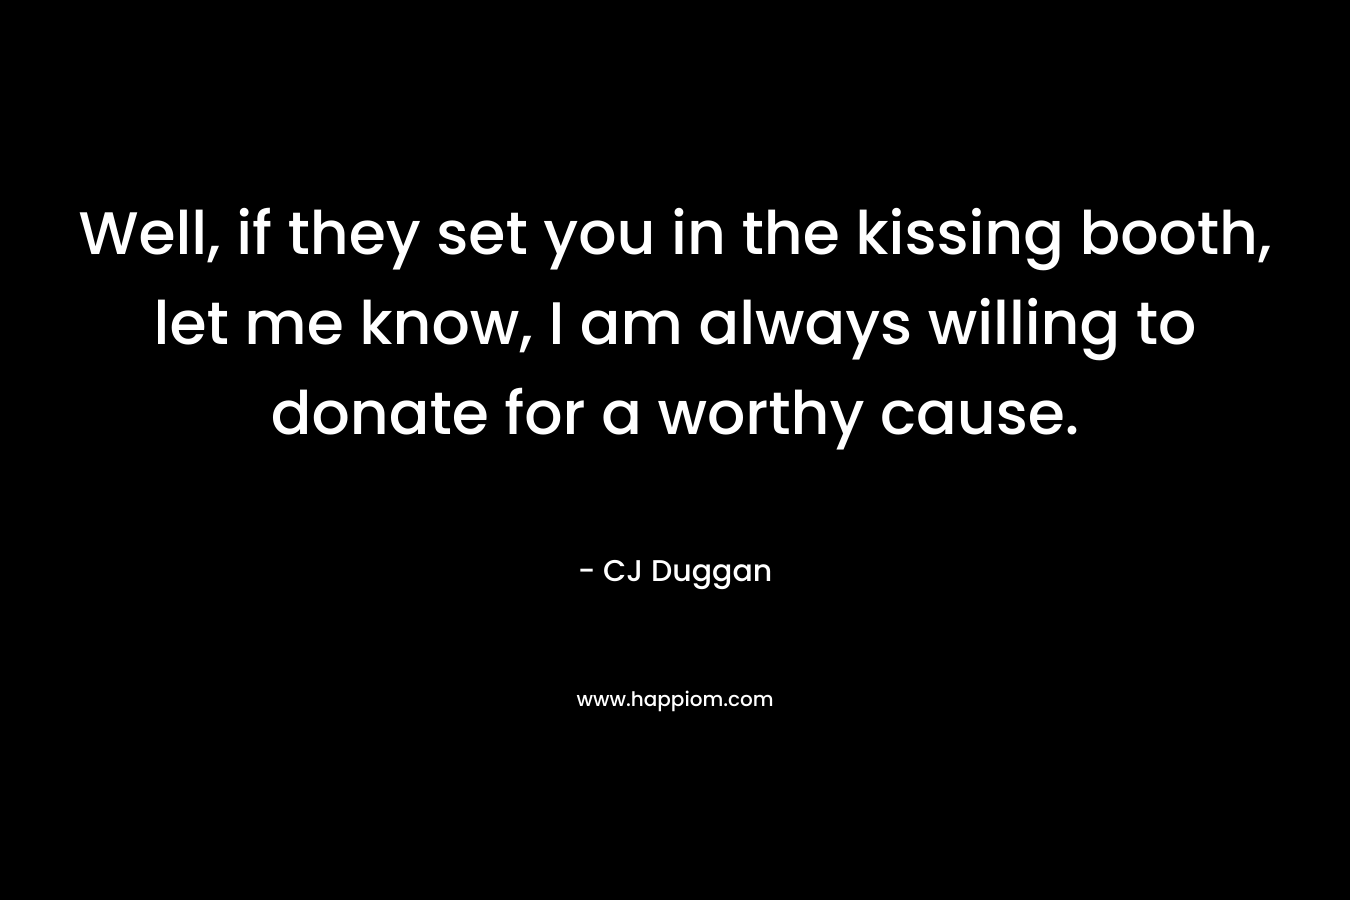 Well, if they set you in the kissing booth, let me know, I am always willing to donate for a worthy cause. – CJ Duggan